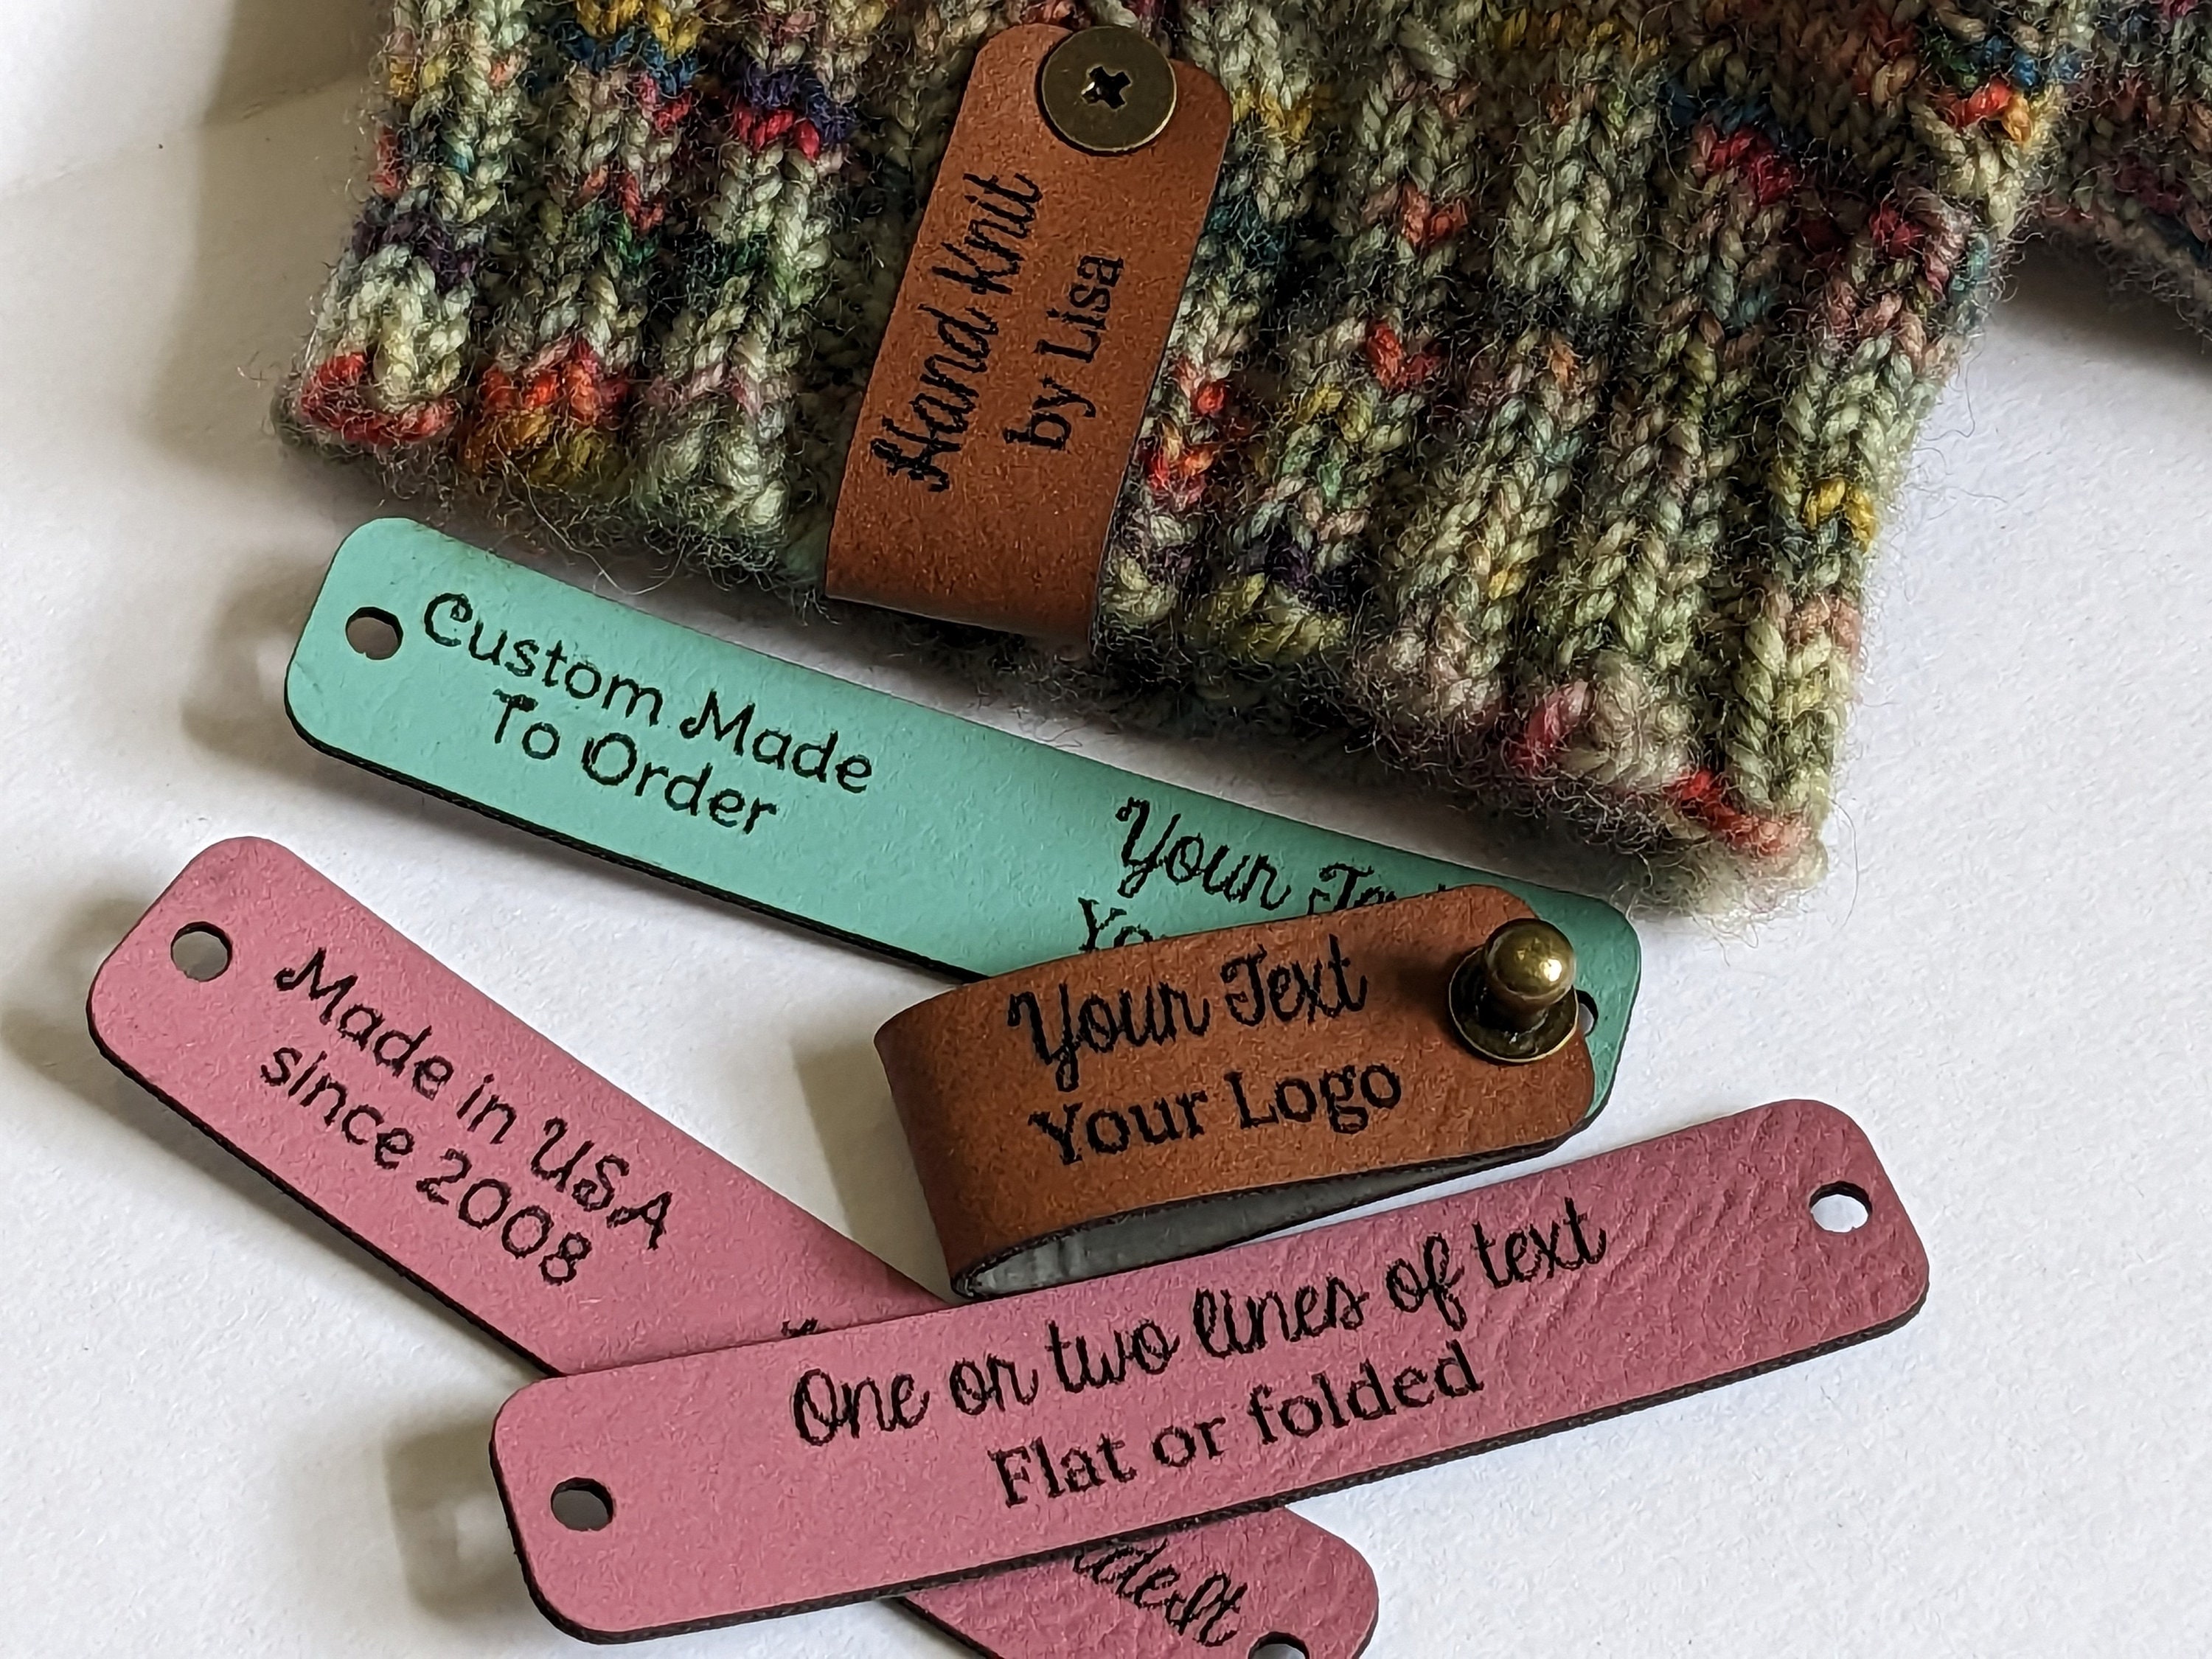 Personalised Tags for Handmade Crafts, Custom Labels for Knitted, Woven,  Stitch Craft Items, Hand Made Name Tages, Personalized ID Tags 